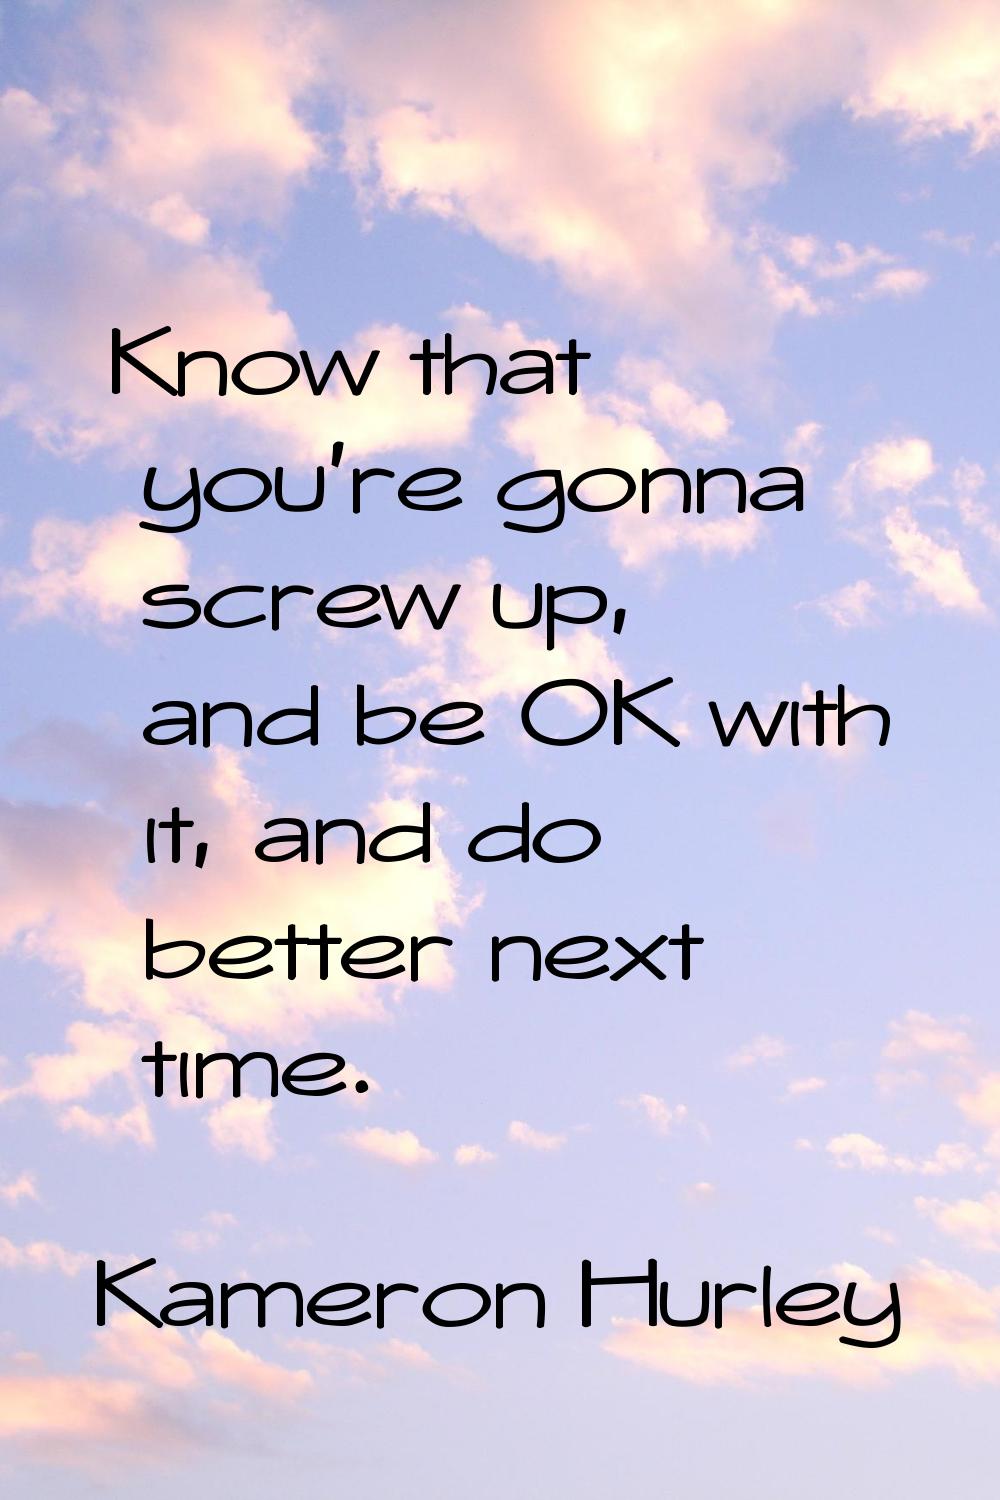 Know that you're gonna screw up, and be OK with it, and do better next time.